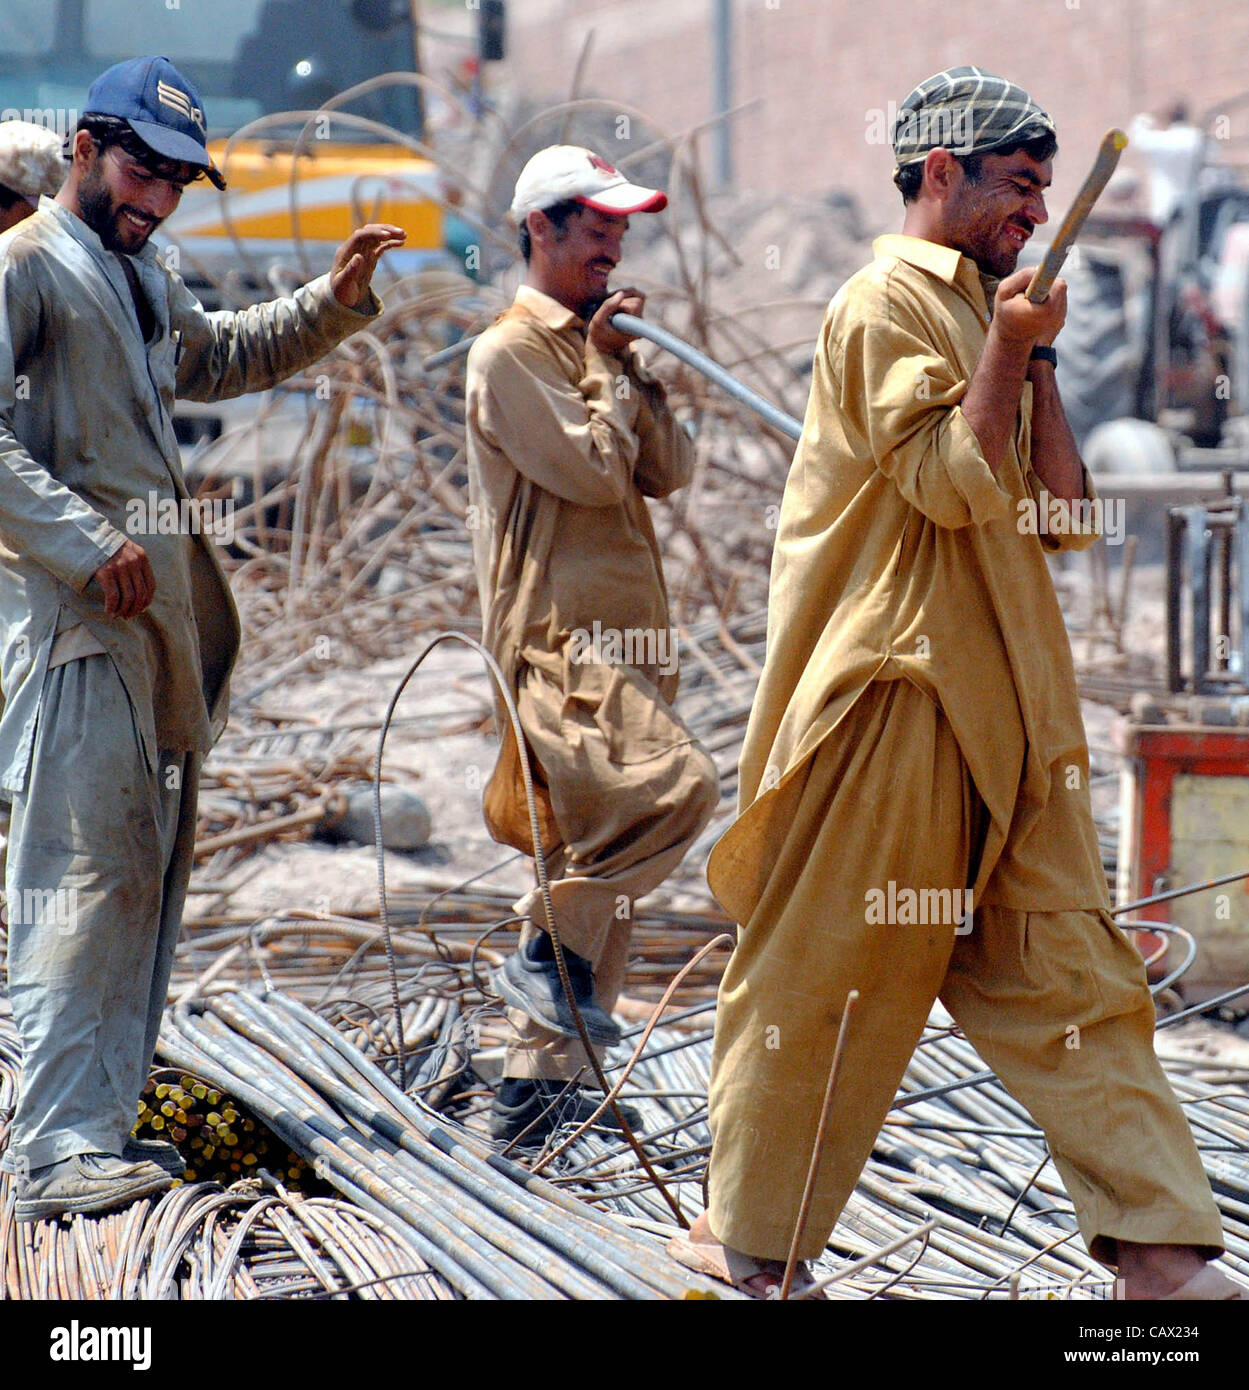 Labors busy in work at a construction site on the Eve of World Labor Day in Peshawar on Monday, April 30, 2012 Stock Photo - Alamy